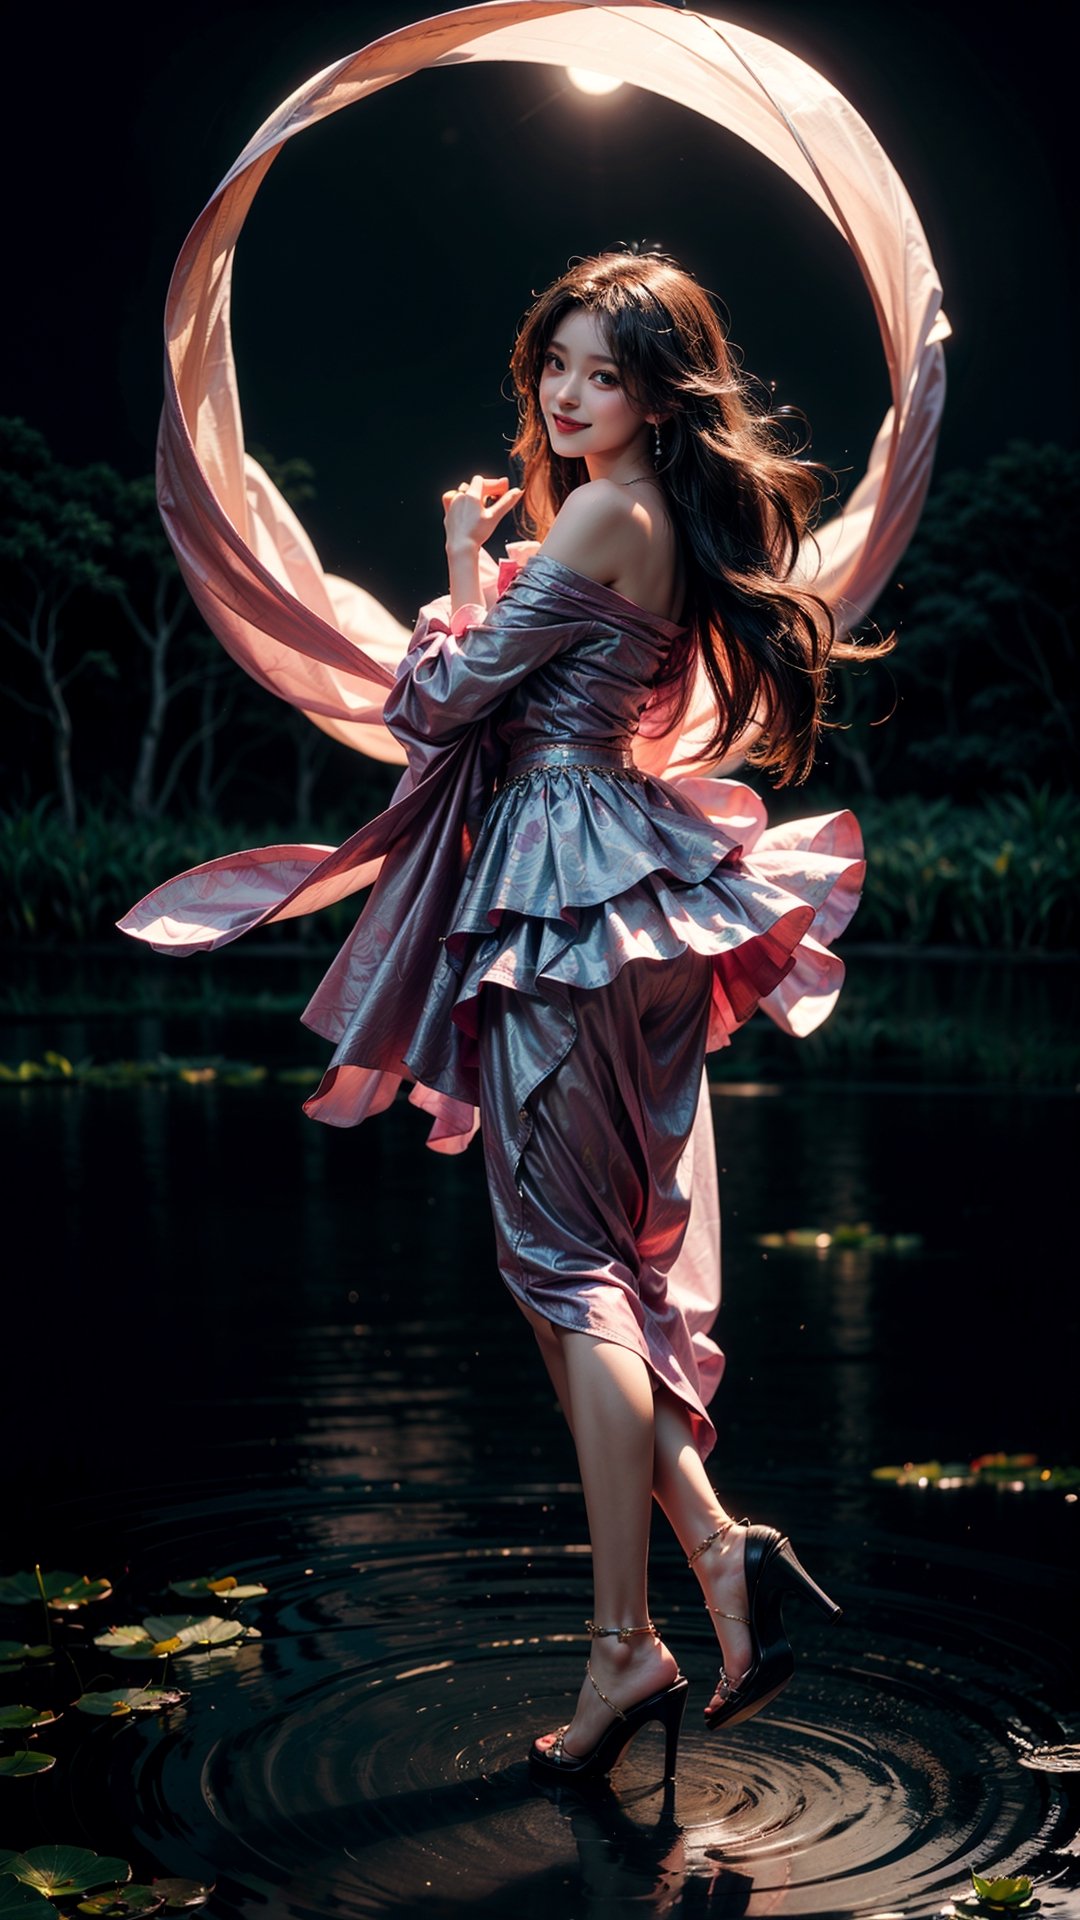 At the peaceful lotus pond, basked in the gentle moonlight, a girl appears, draped in a (figure-hugging:1.3) pink gown. Accentuated by a delicate waist belt and sparkling (jewelry:1.3), her attire features (layered skirts that gracefully flow:1.2), reminiscent of the lotus petals. Her (flowing locks:1.3) dance in the air, echoing the movements of the serene lotus leaves. The moonlight reflects upon the blooming lotus flowers, creating a scene of ethereal beauty. With a radiant smile, (high-heeled shoes:1.2), the girl emanates joy, as if she embodies the vibrant spirit of the lotus pond,perfecteyes